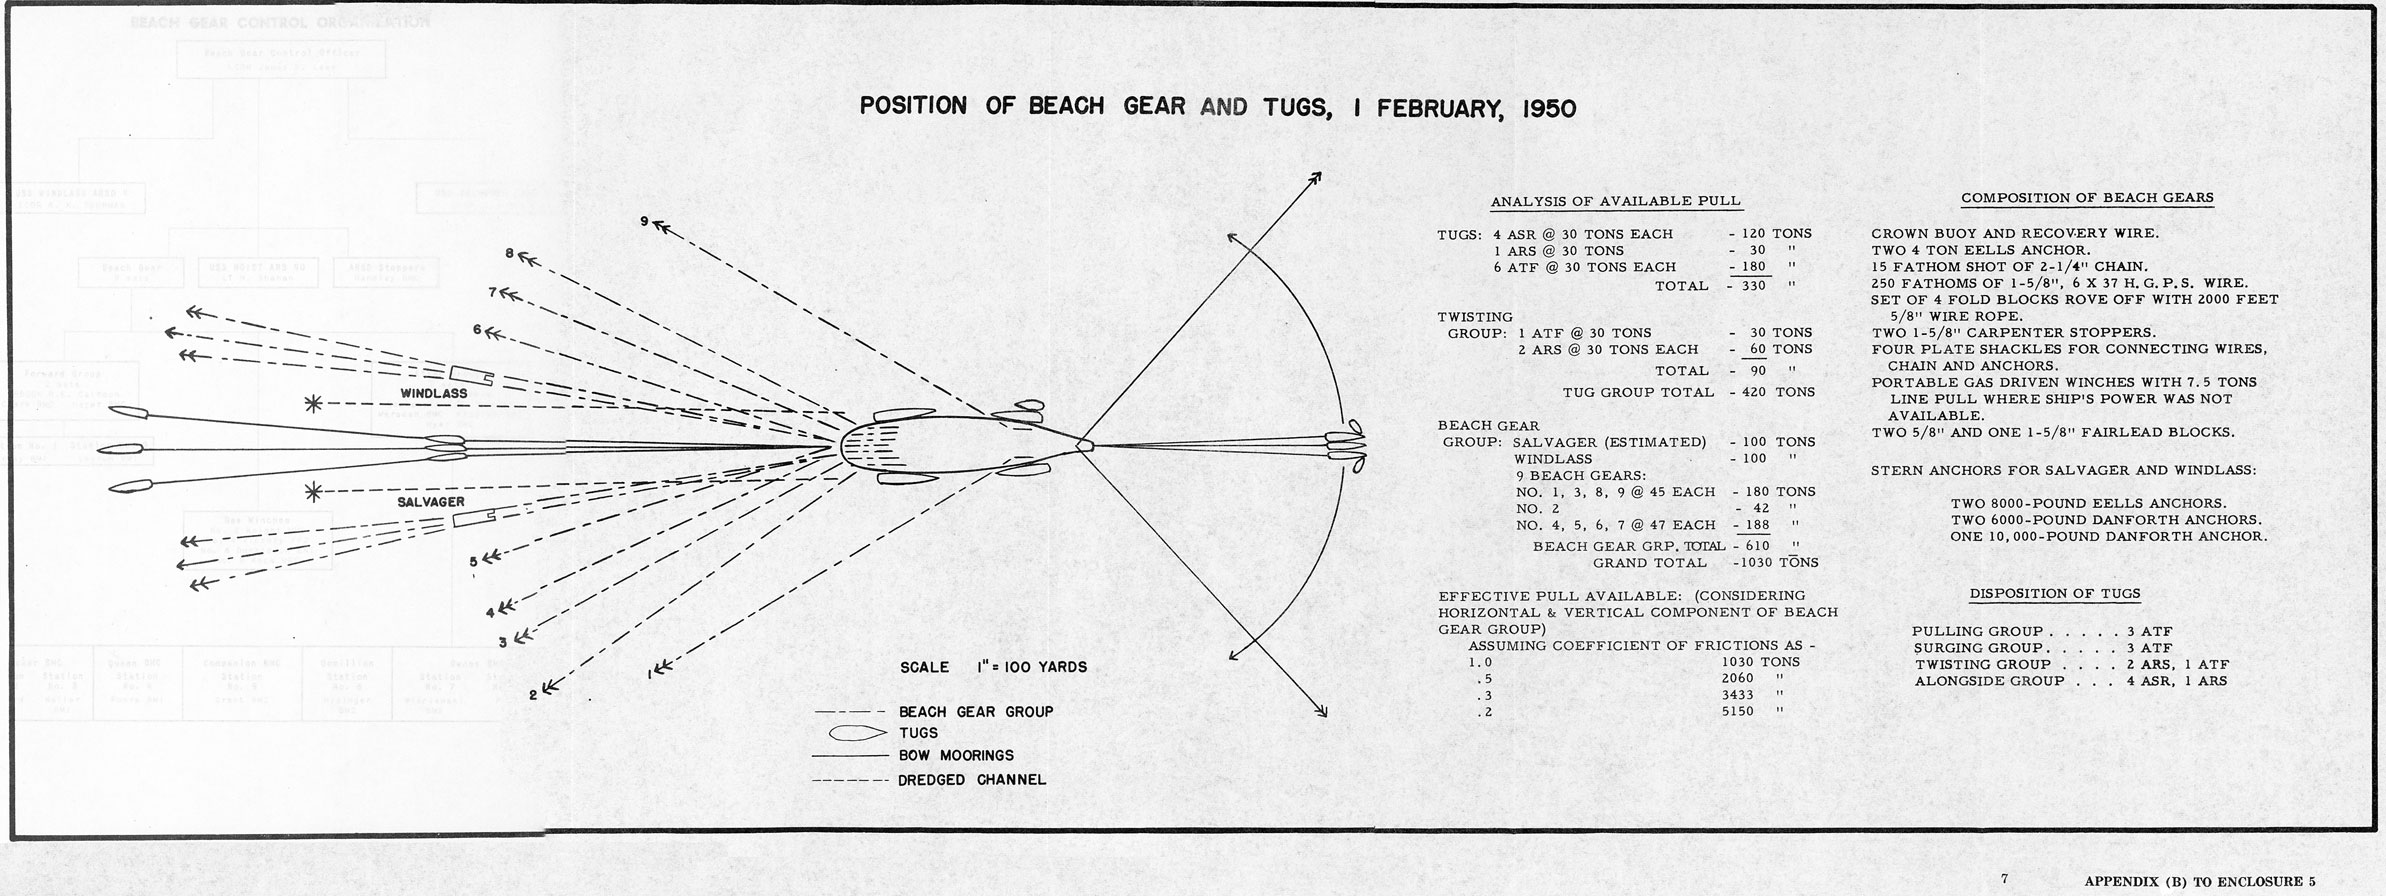 
Page 7.
Position of Beach Gear and Tugs, 1 February, 1950
7 Appending (B) To Enclosure 5